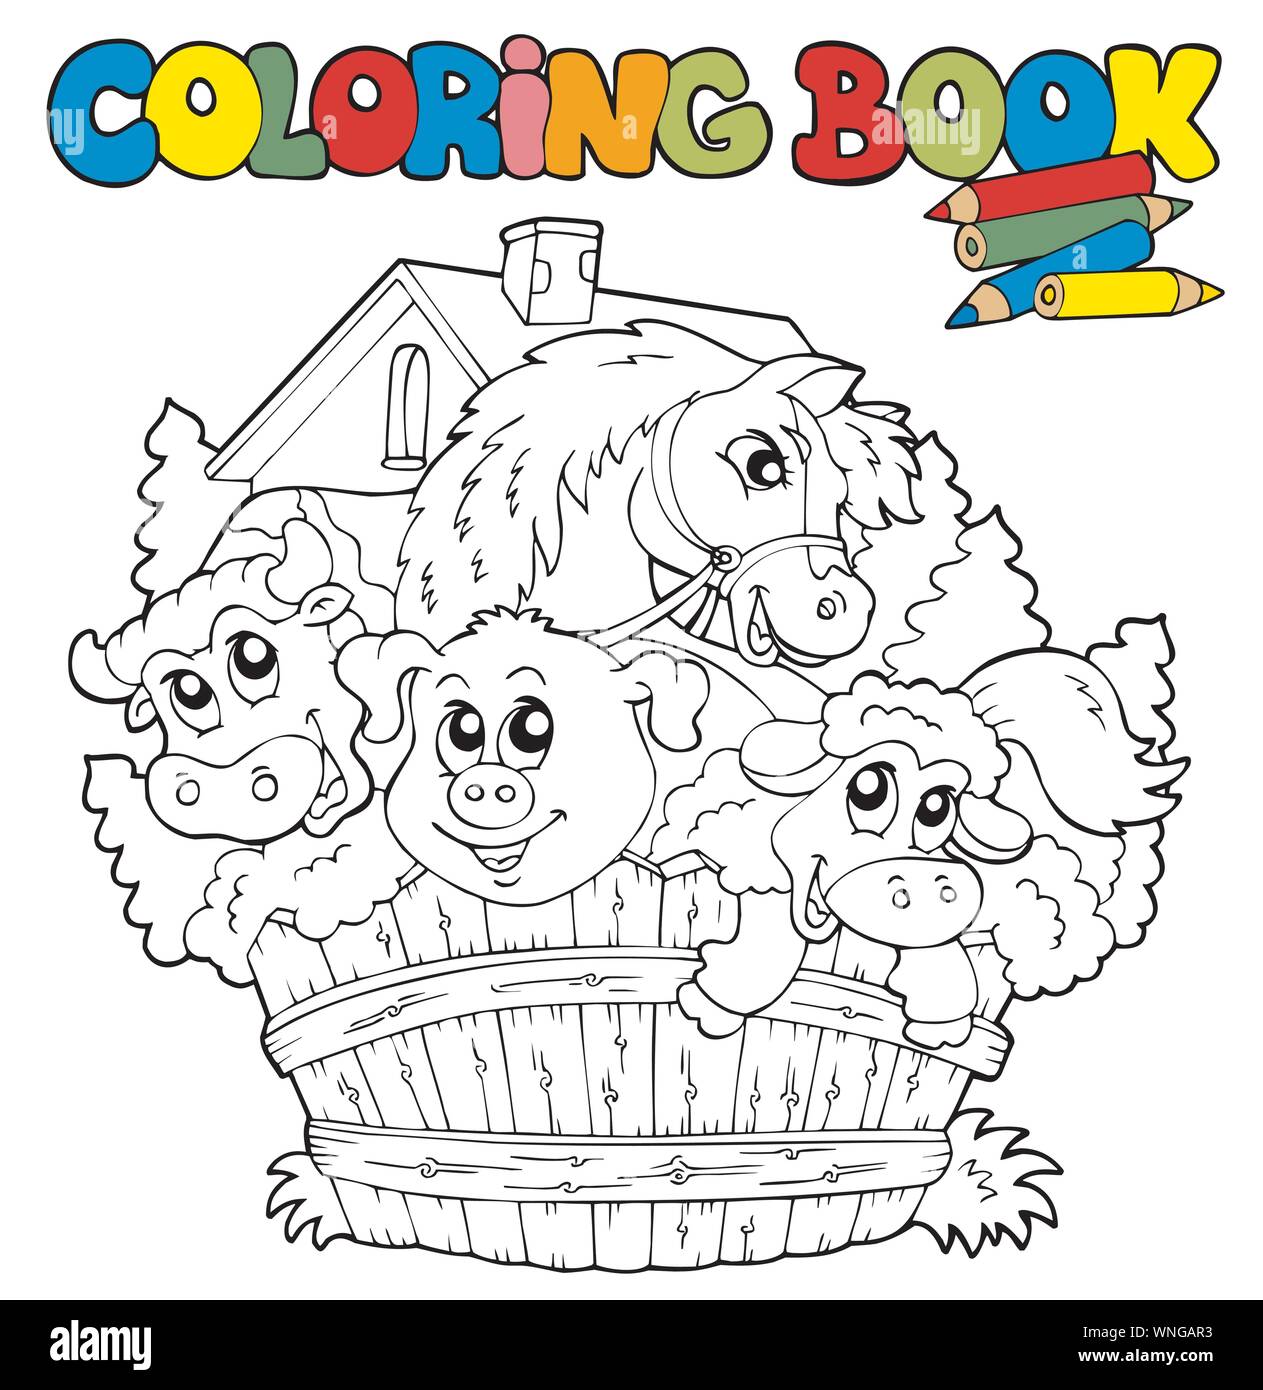 Cute Coloring Pages For Kids Of A Bookshelf With Two Cute Animals